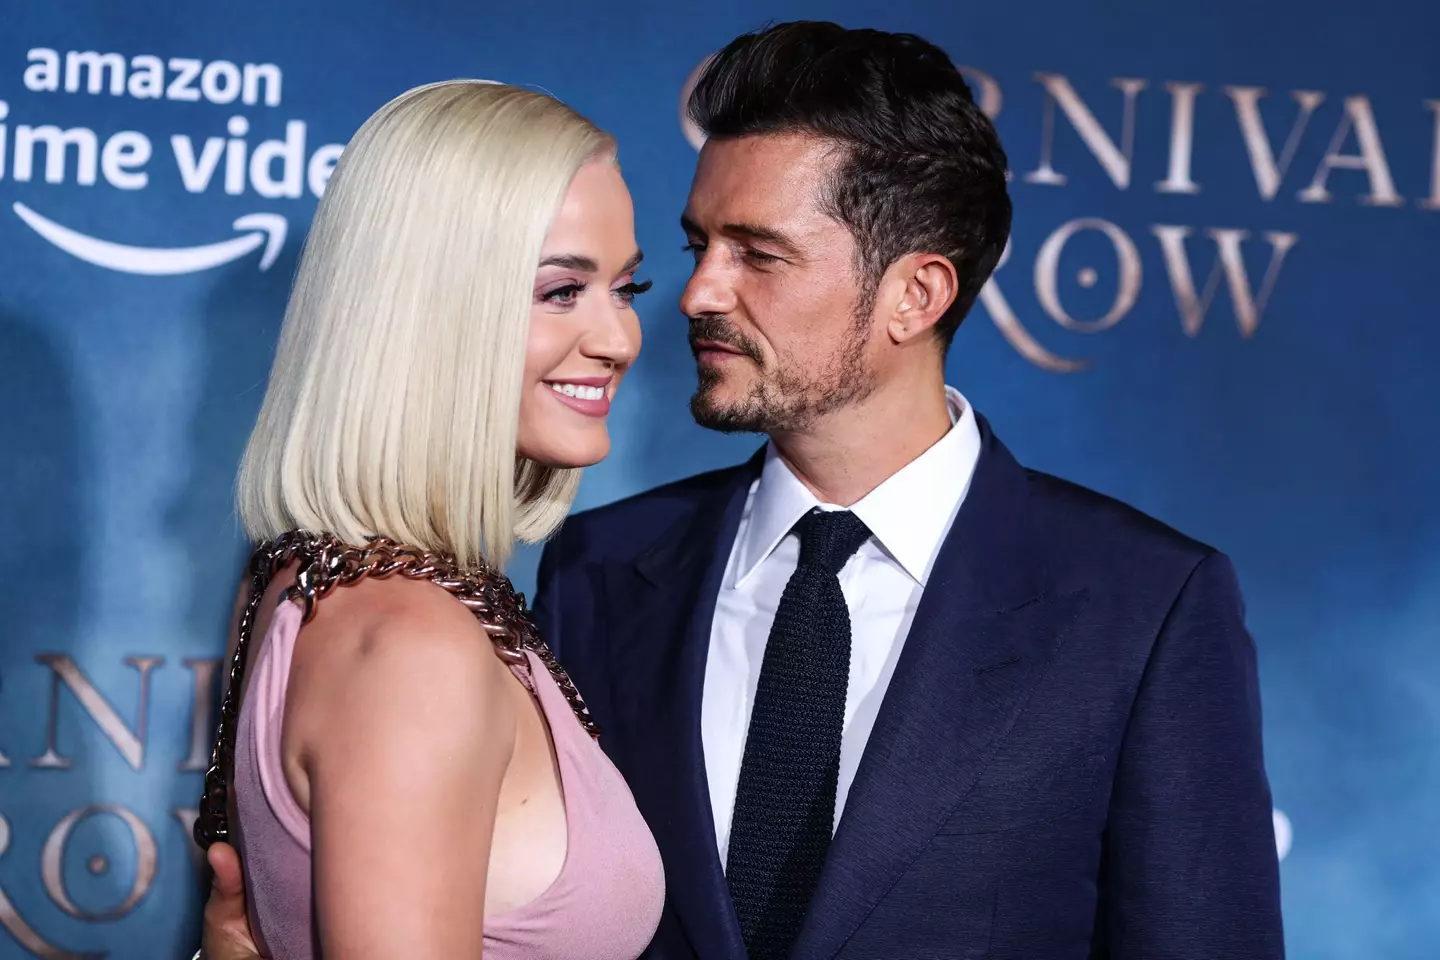 Katy Perry and Orlando Bloom met in 2016.